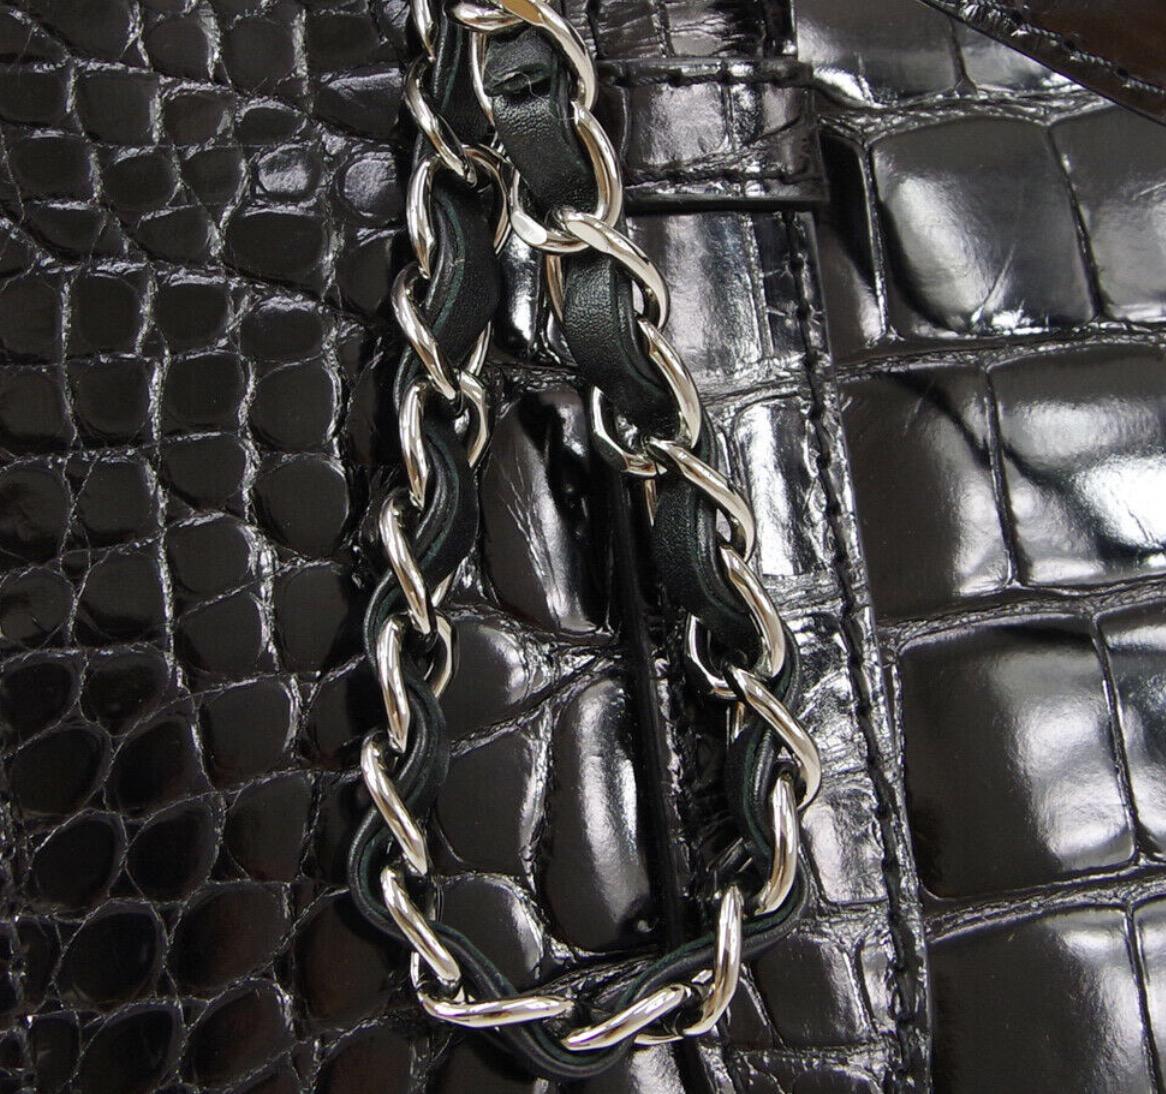 
Crocodile
Leather
Leather lining
Silver tone hardware 
Zip closure
Made in France
Date code present
Handle drop 7